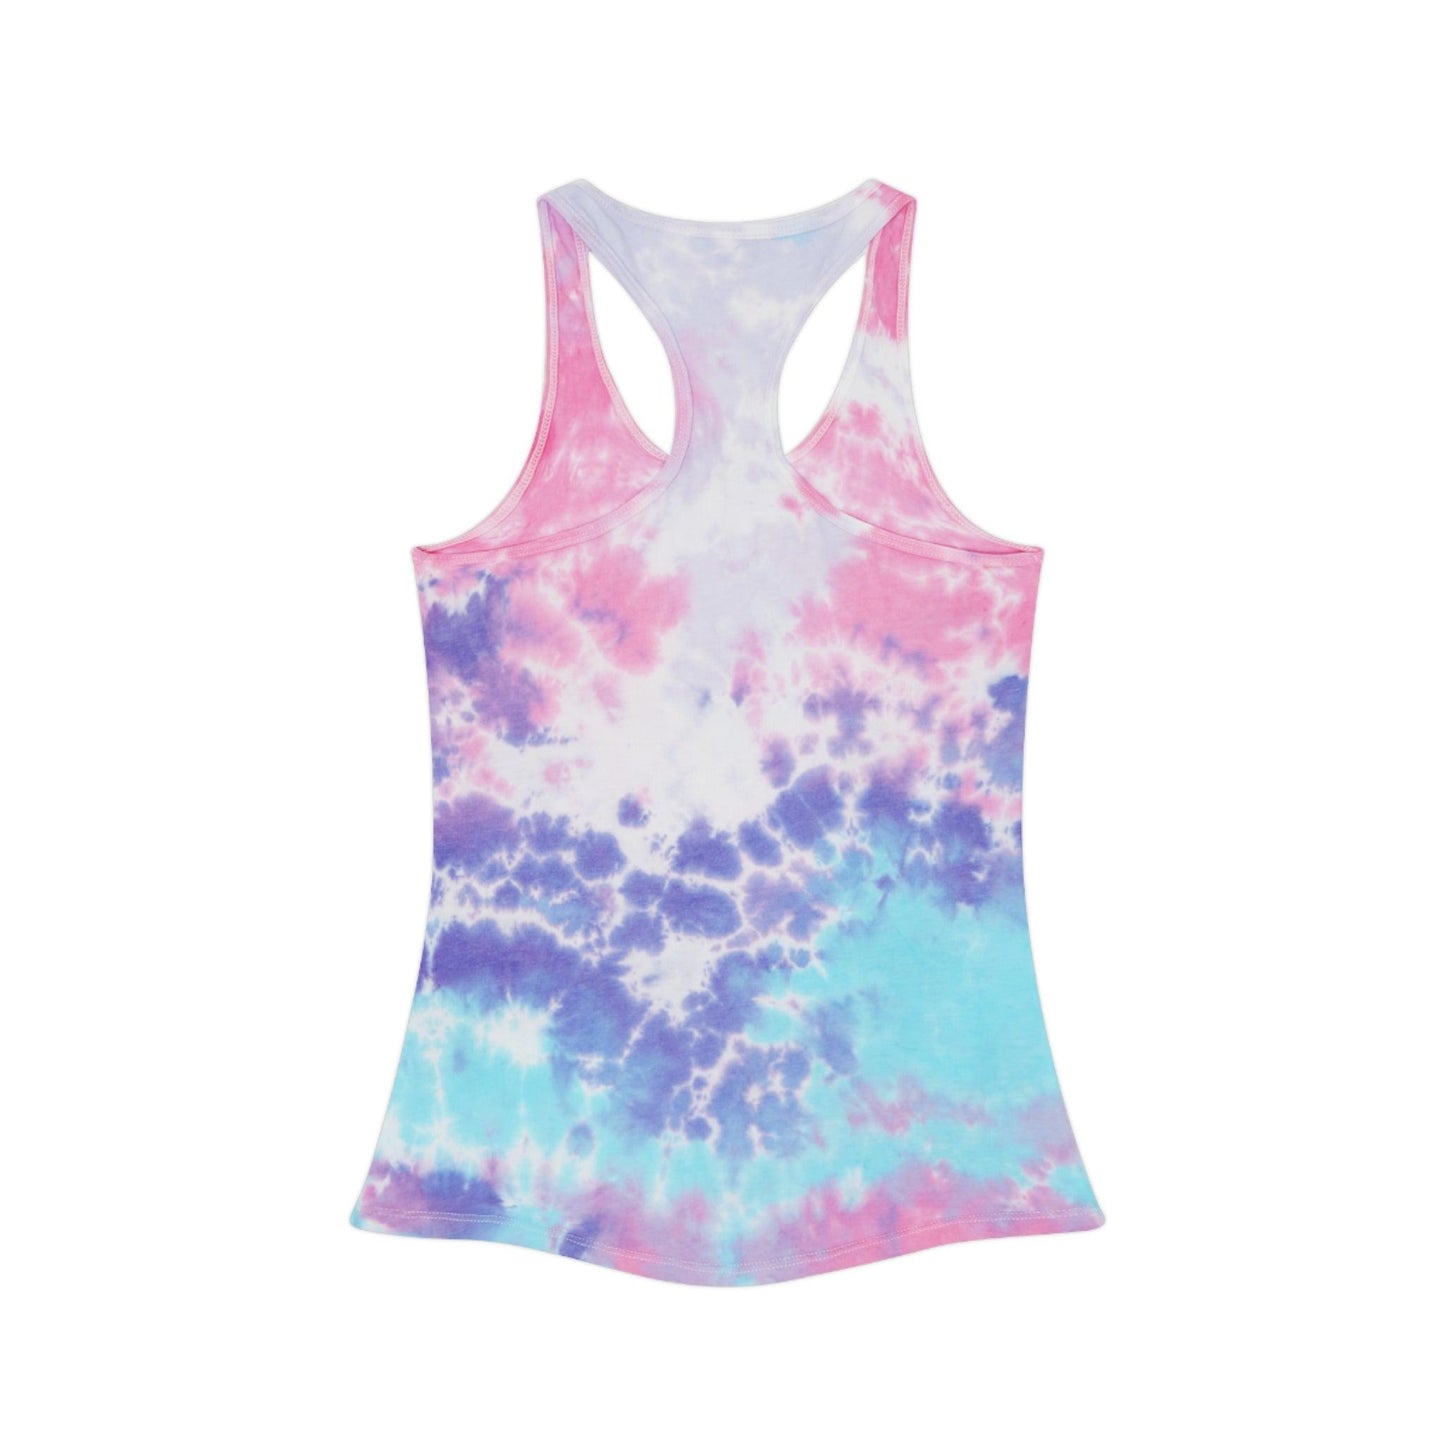 Salt and Tequila Feed the Soul Tie Dye Racerback Tank Top - Coastal Collections